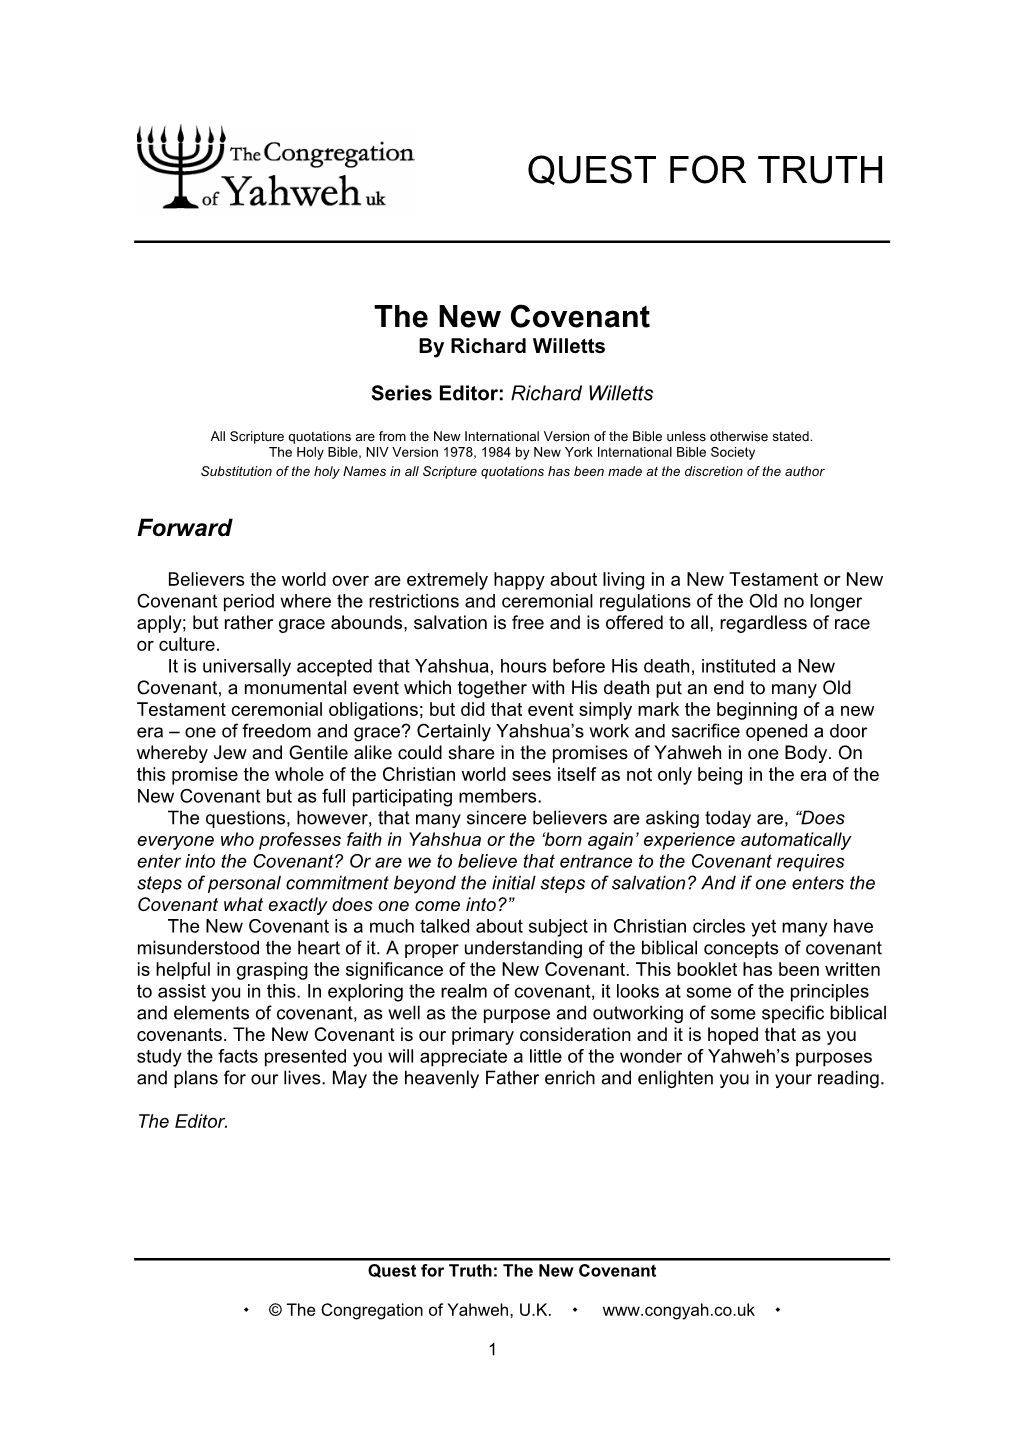 The New Covenant by Richard Willetts